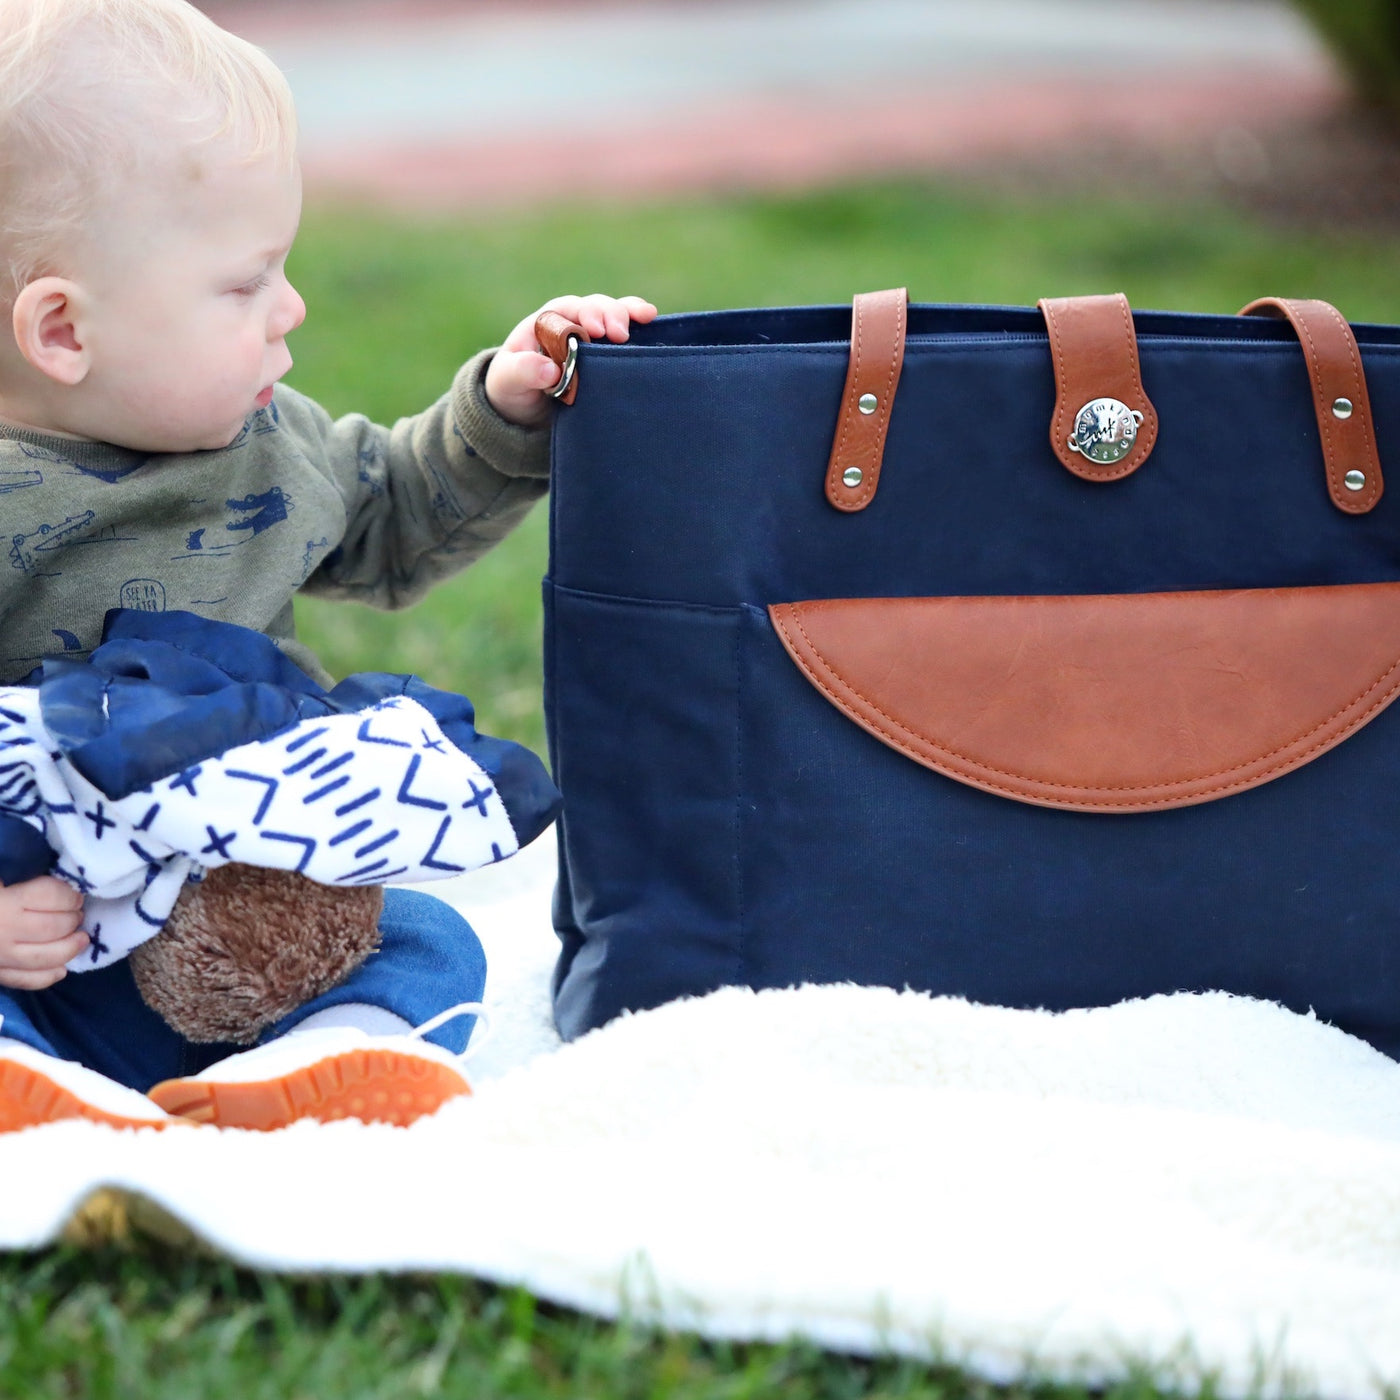 A baby sitting on a blanket outside on the grass, looking at a navy blue canvas tote which has caramel brown vegan leather accents.